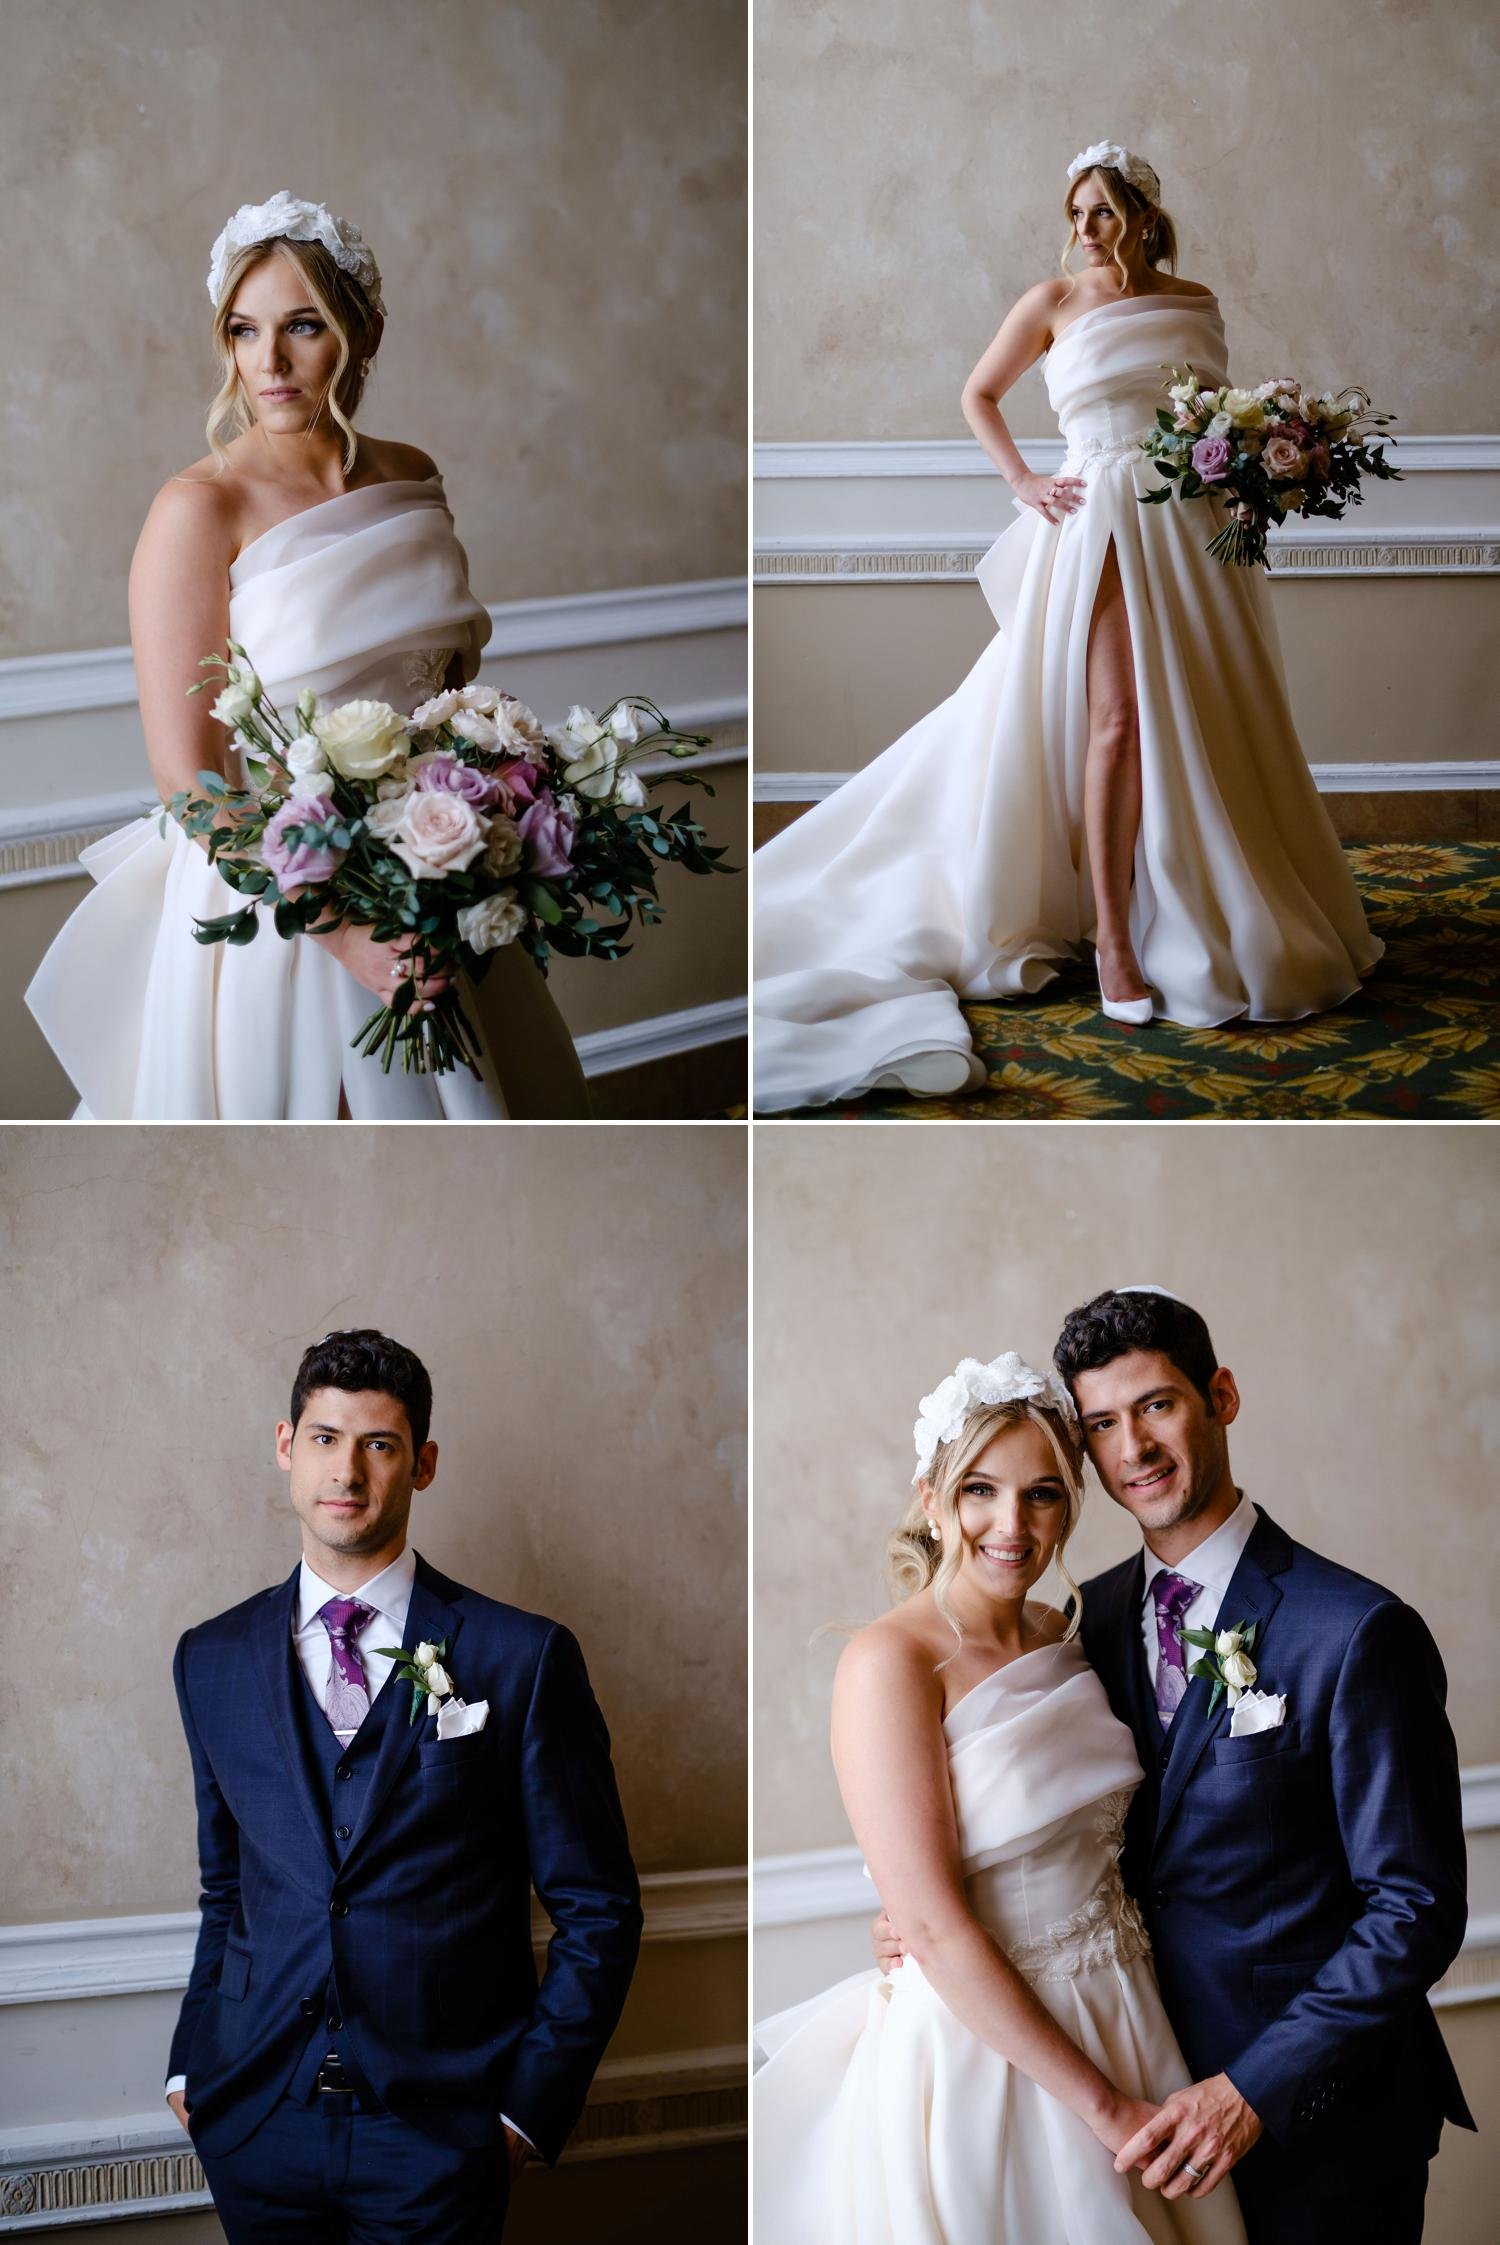 natural light portraits of a bride and groom